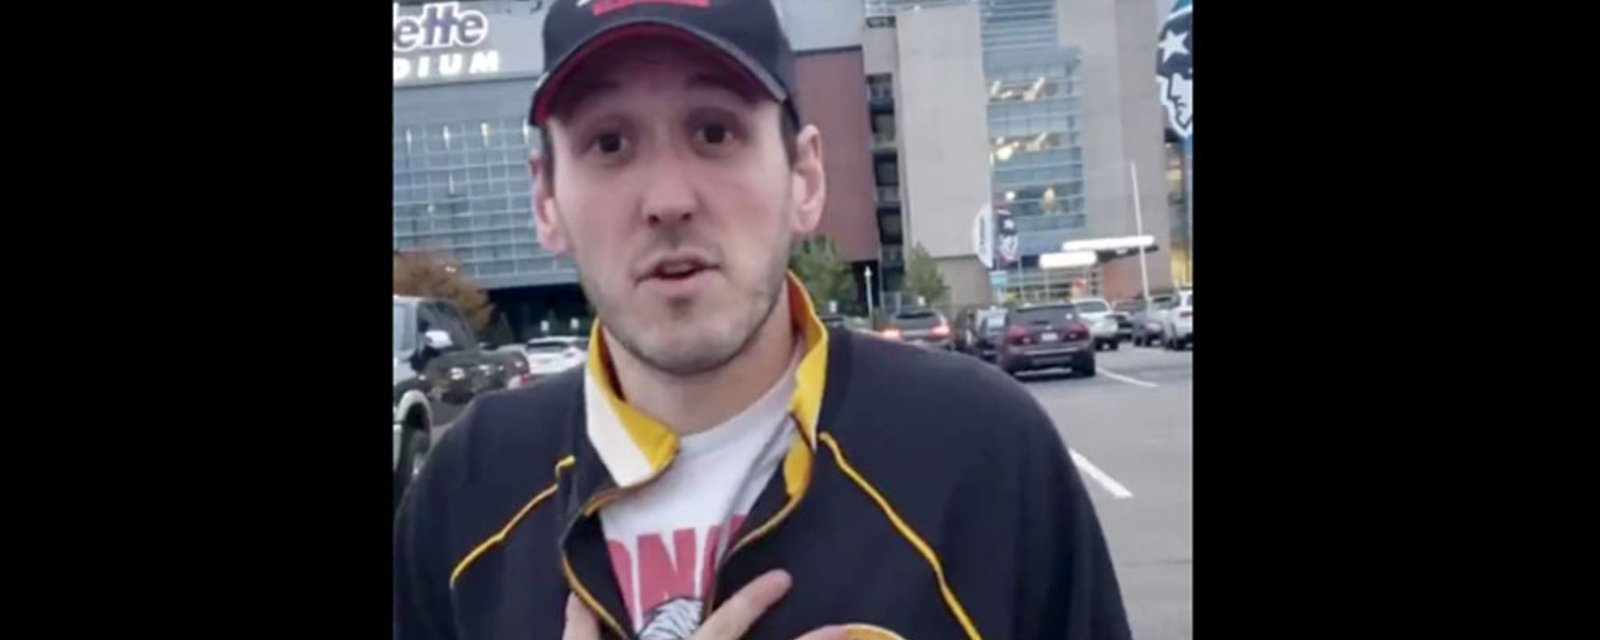 Bruins fan says he’ll take on “Any Canadiens fan… or liberal” in a boxing match